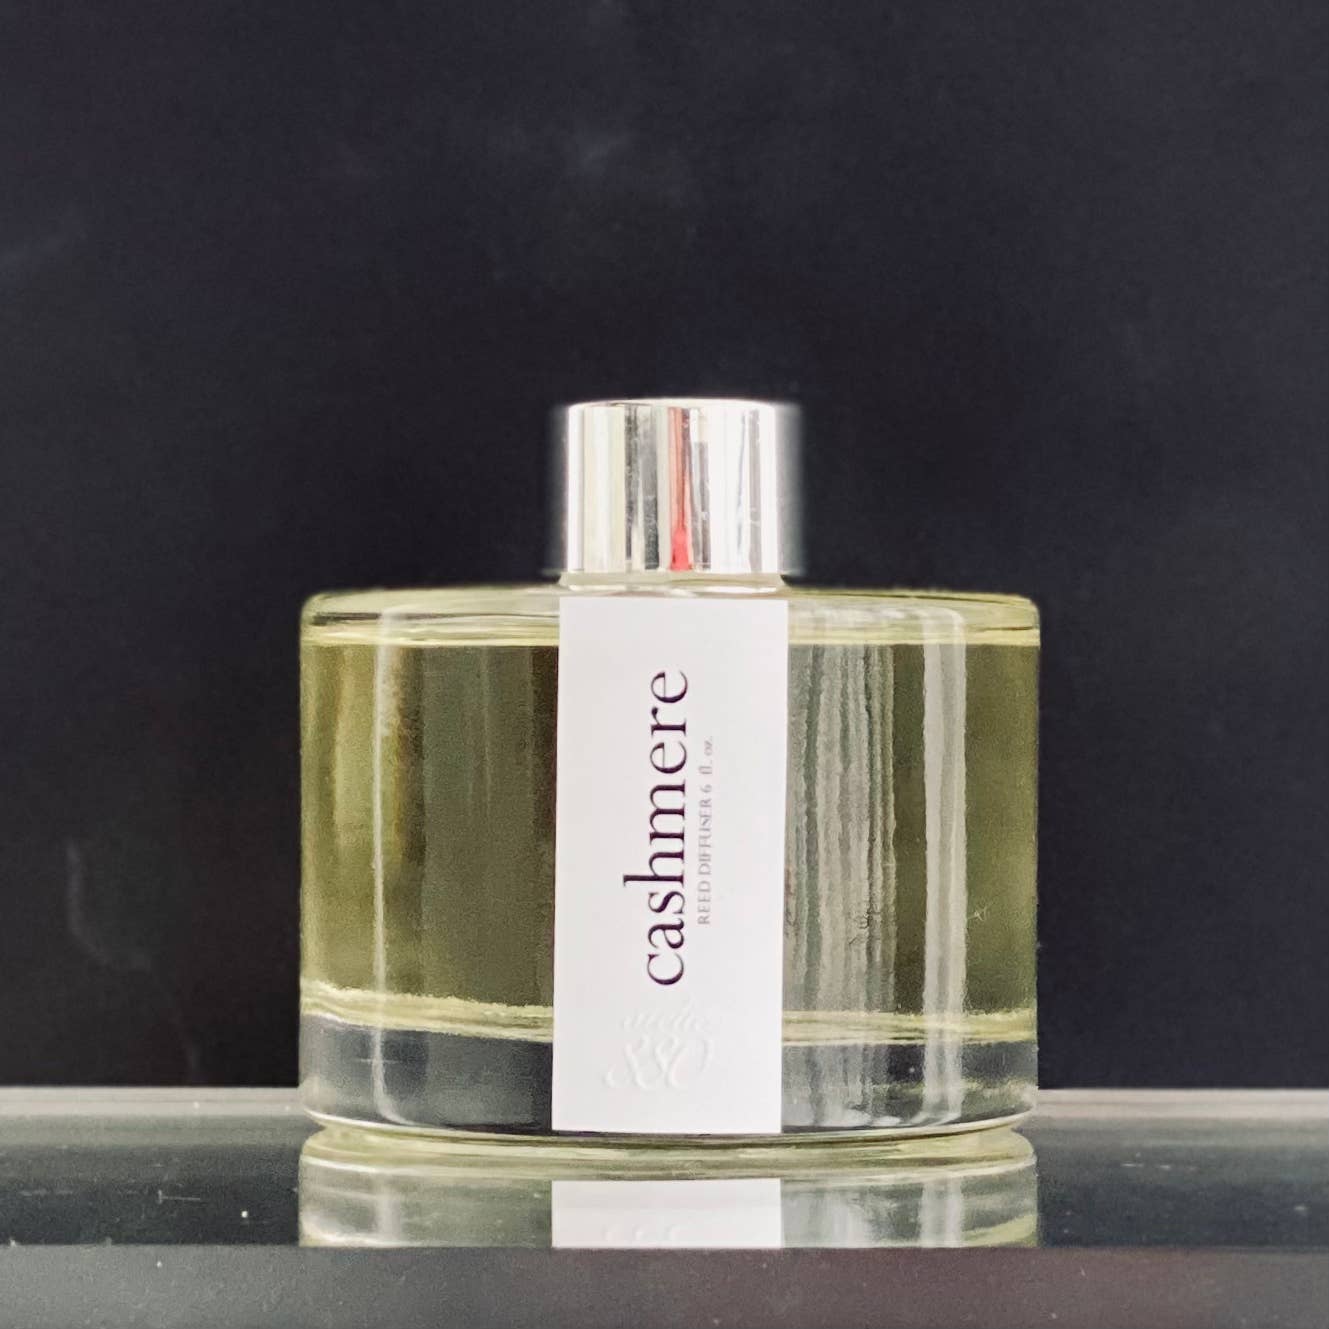 Cashmere Reed Diffuser - Musk, Floral, Fall Winter